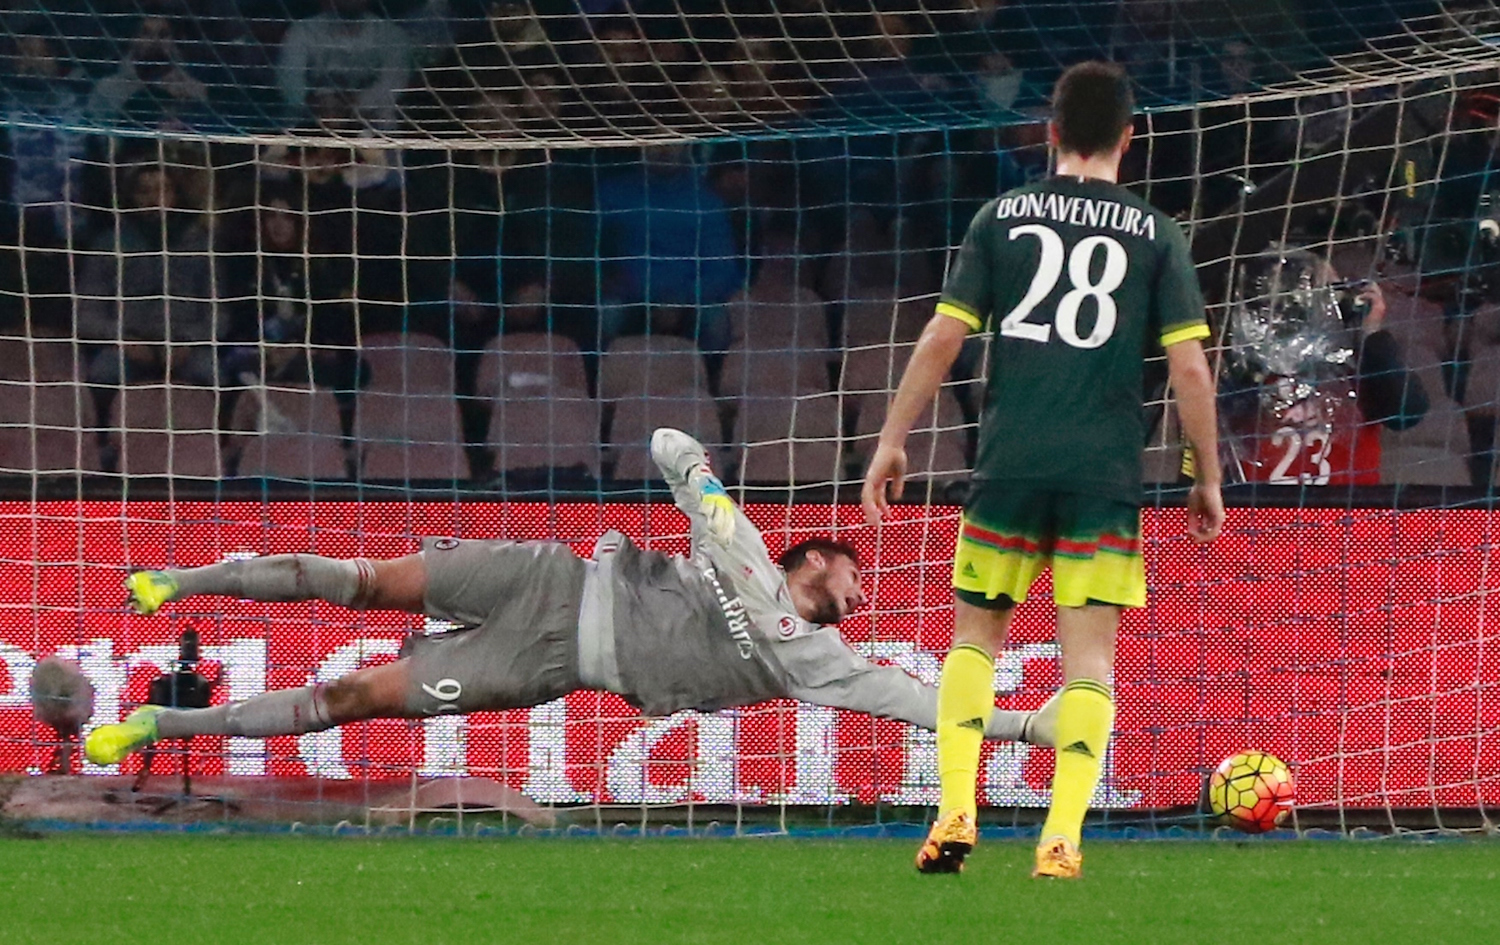 Donnarumma can't reach the deflected shot as Napoli took the lead. | CARLO HERMANN/AFP/Getty Images